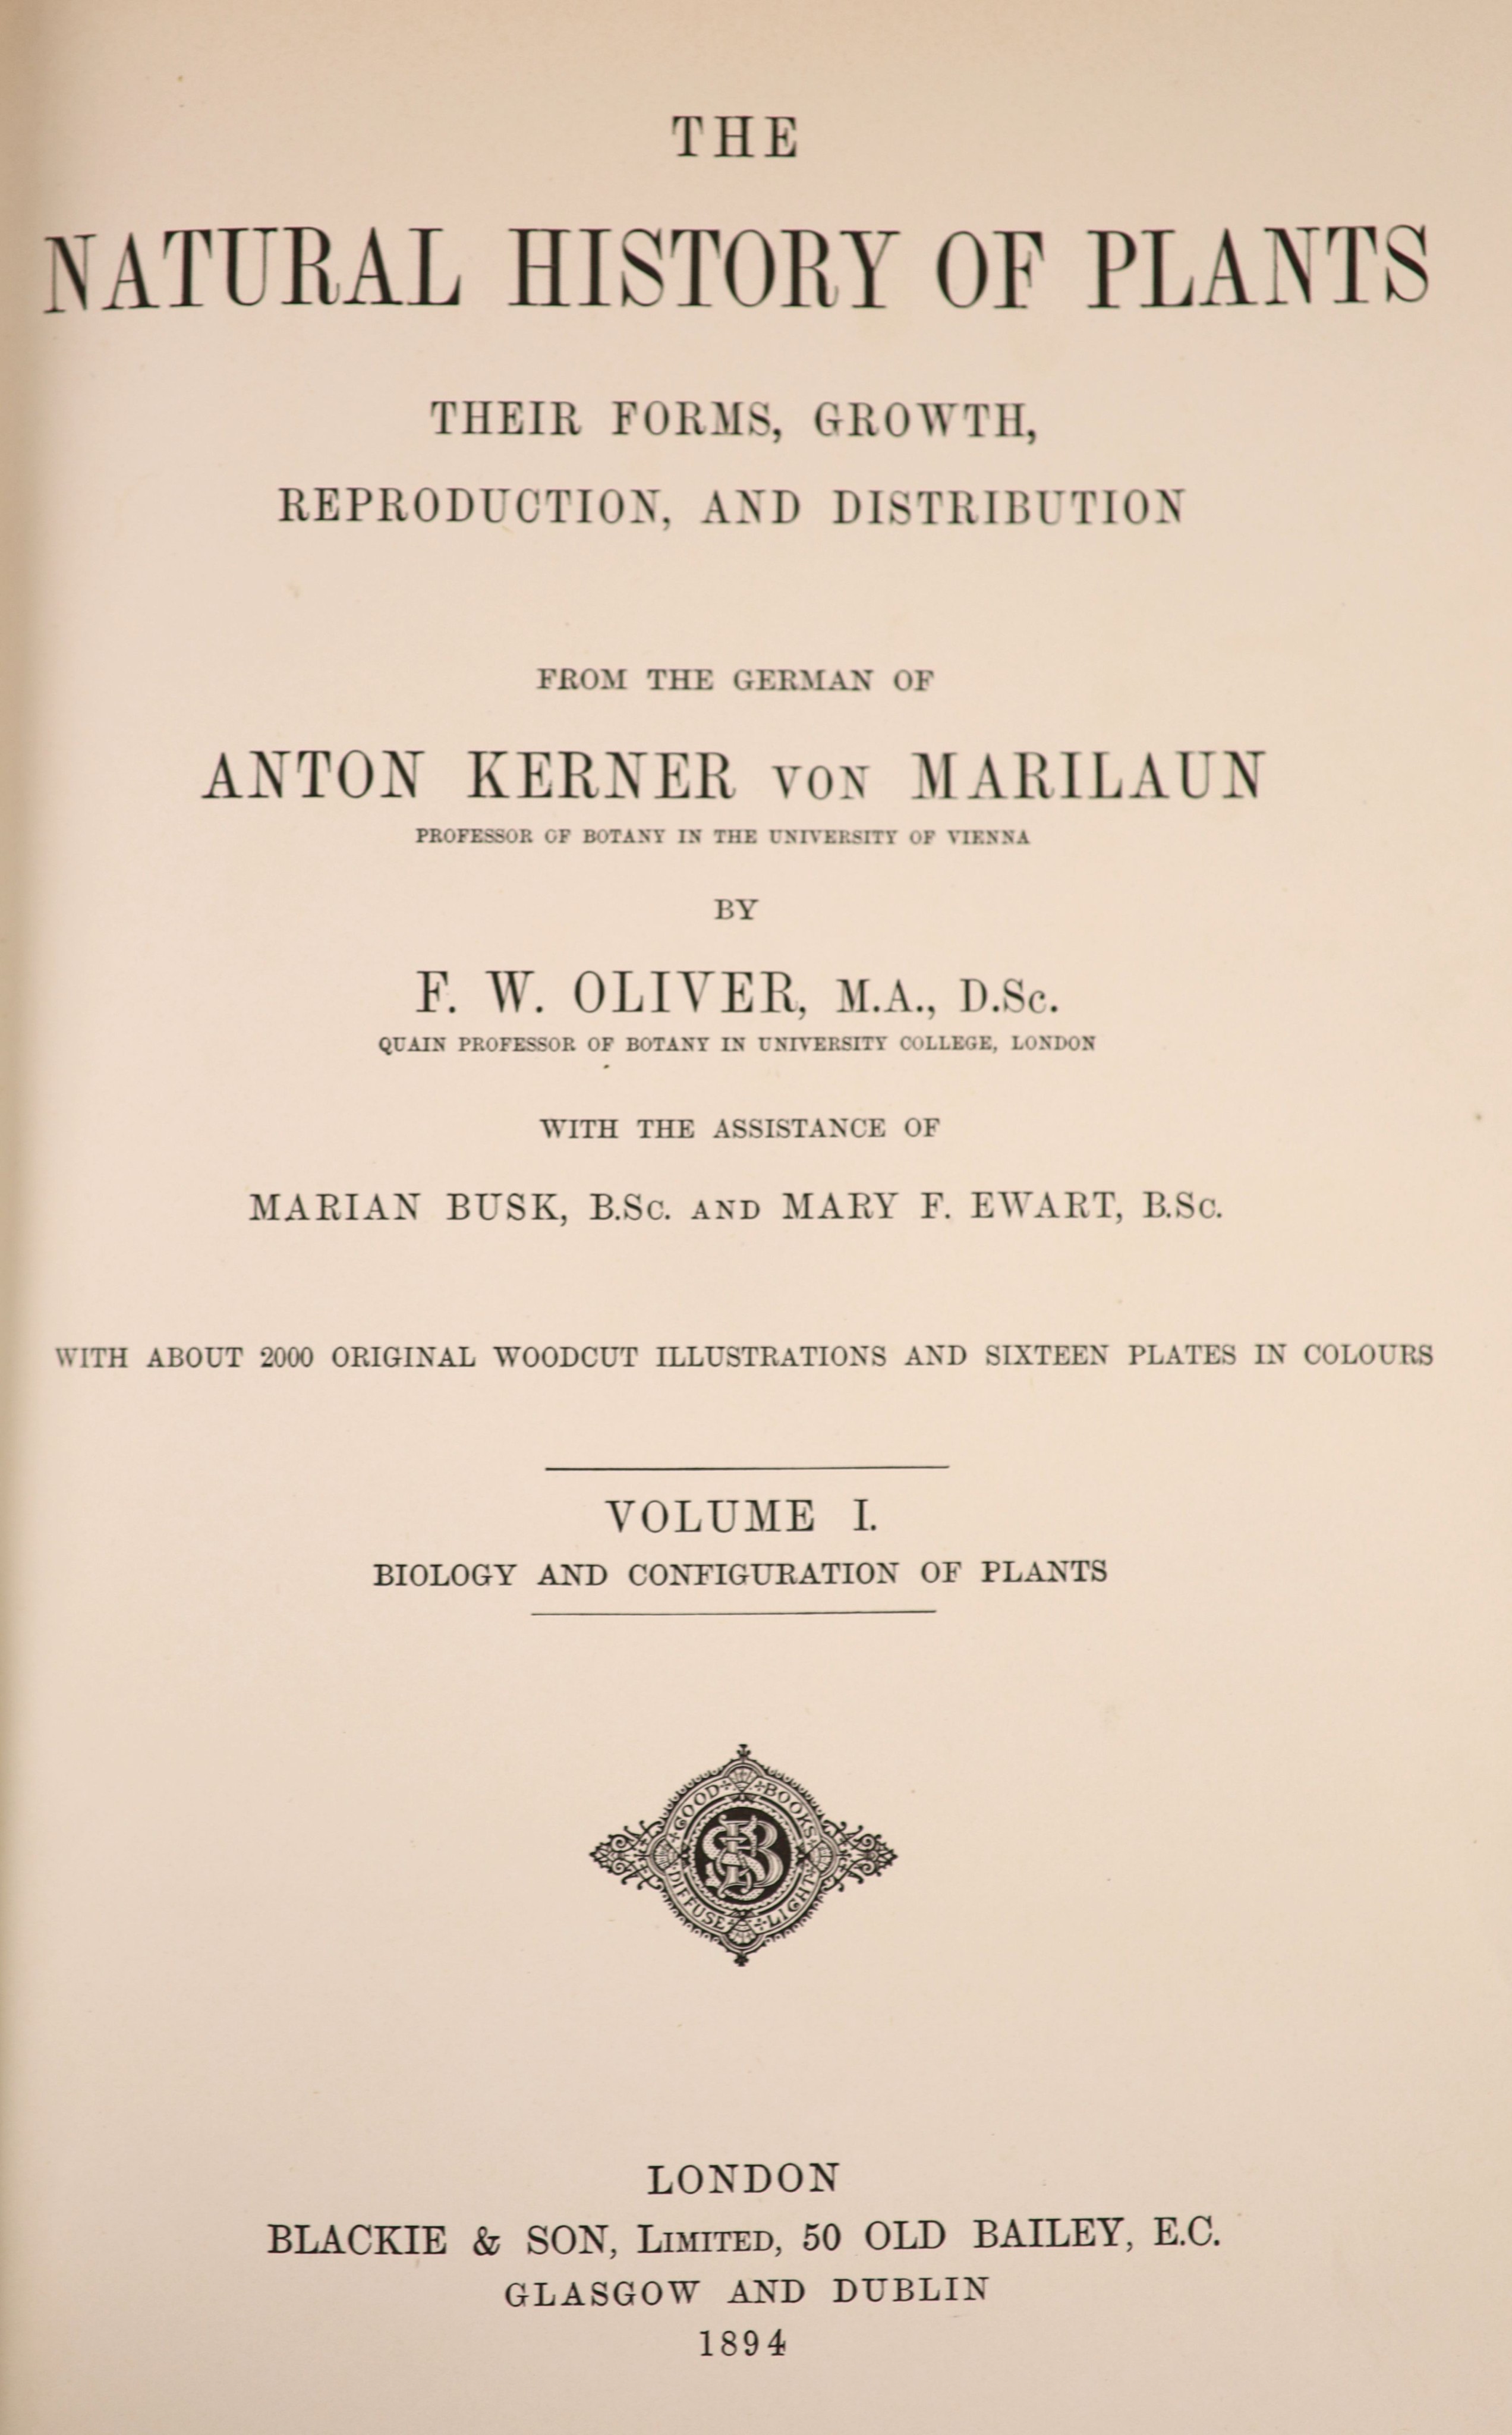 Kerner, Anton [translator], and, Oliver, F.W - The Natural History of Plants their Forms, Growth, Reproduction and Distribution. 2 vols. Complete with a quoted 200 text illustrations and with 16 coloured plates, many of